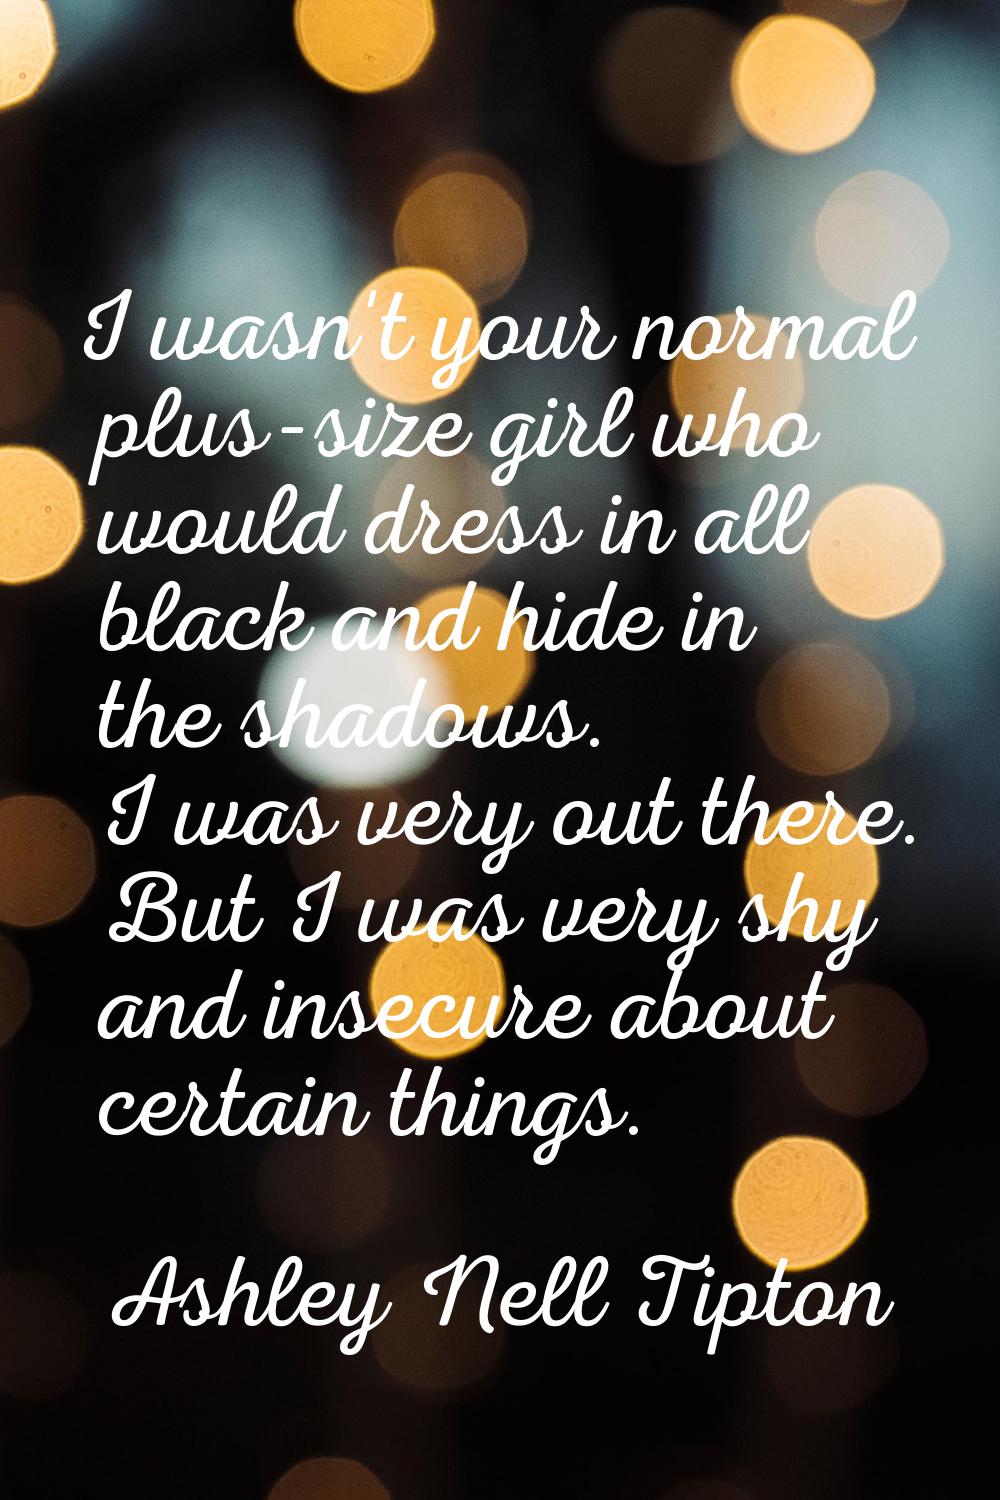 I wasn't your normal plus-size girl who would dress in all black and hide in the shadows. I was ver